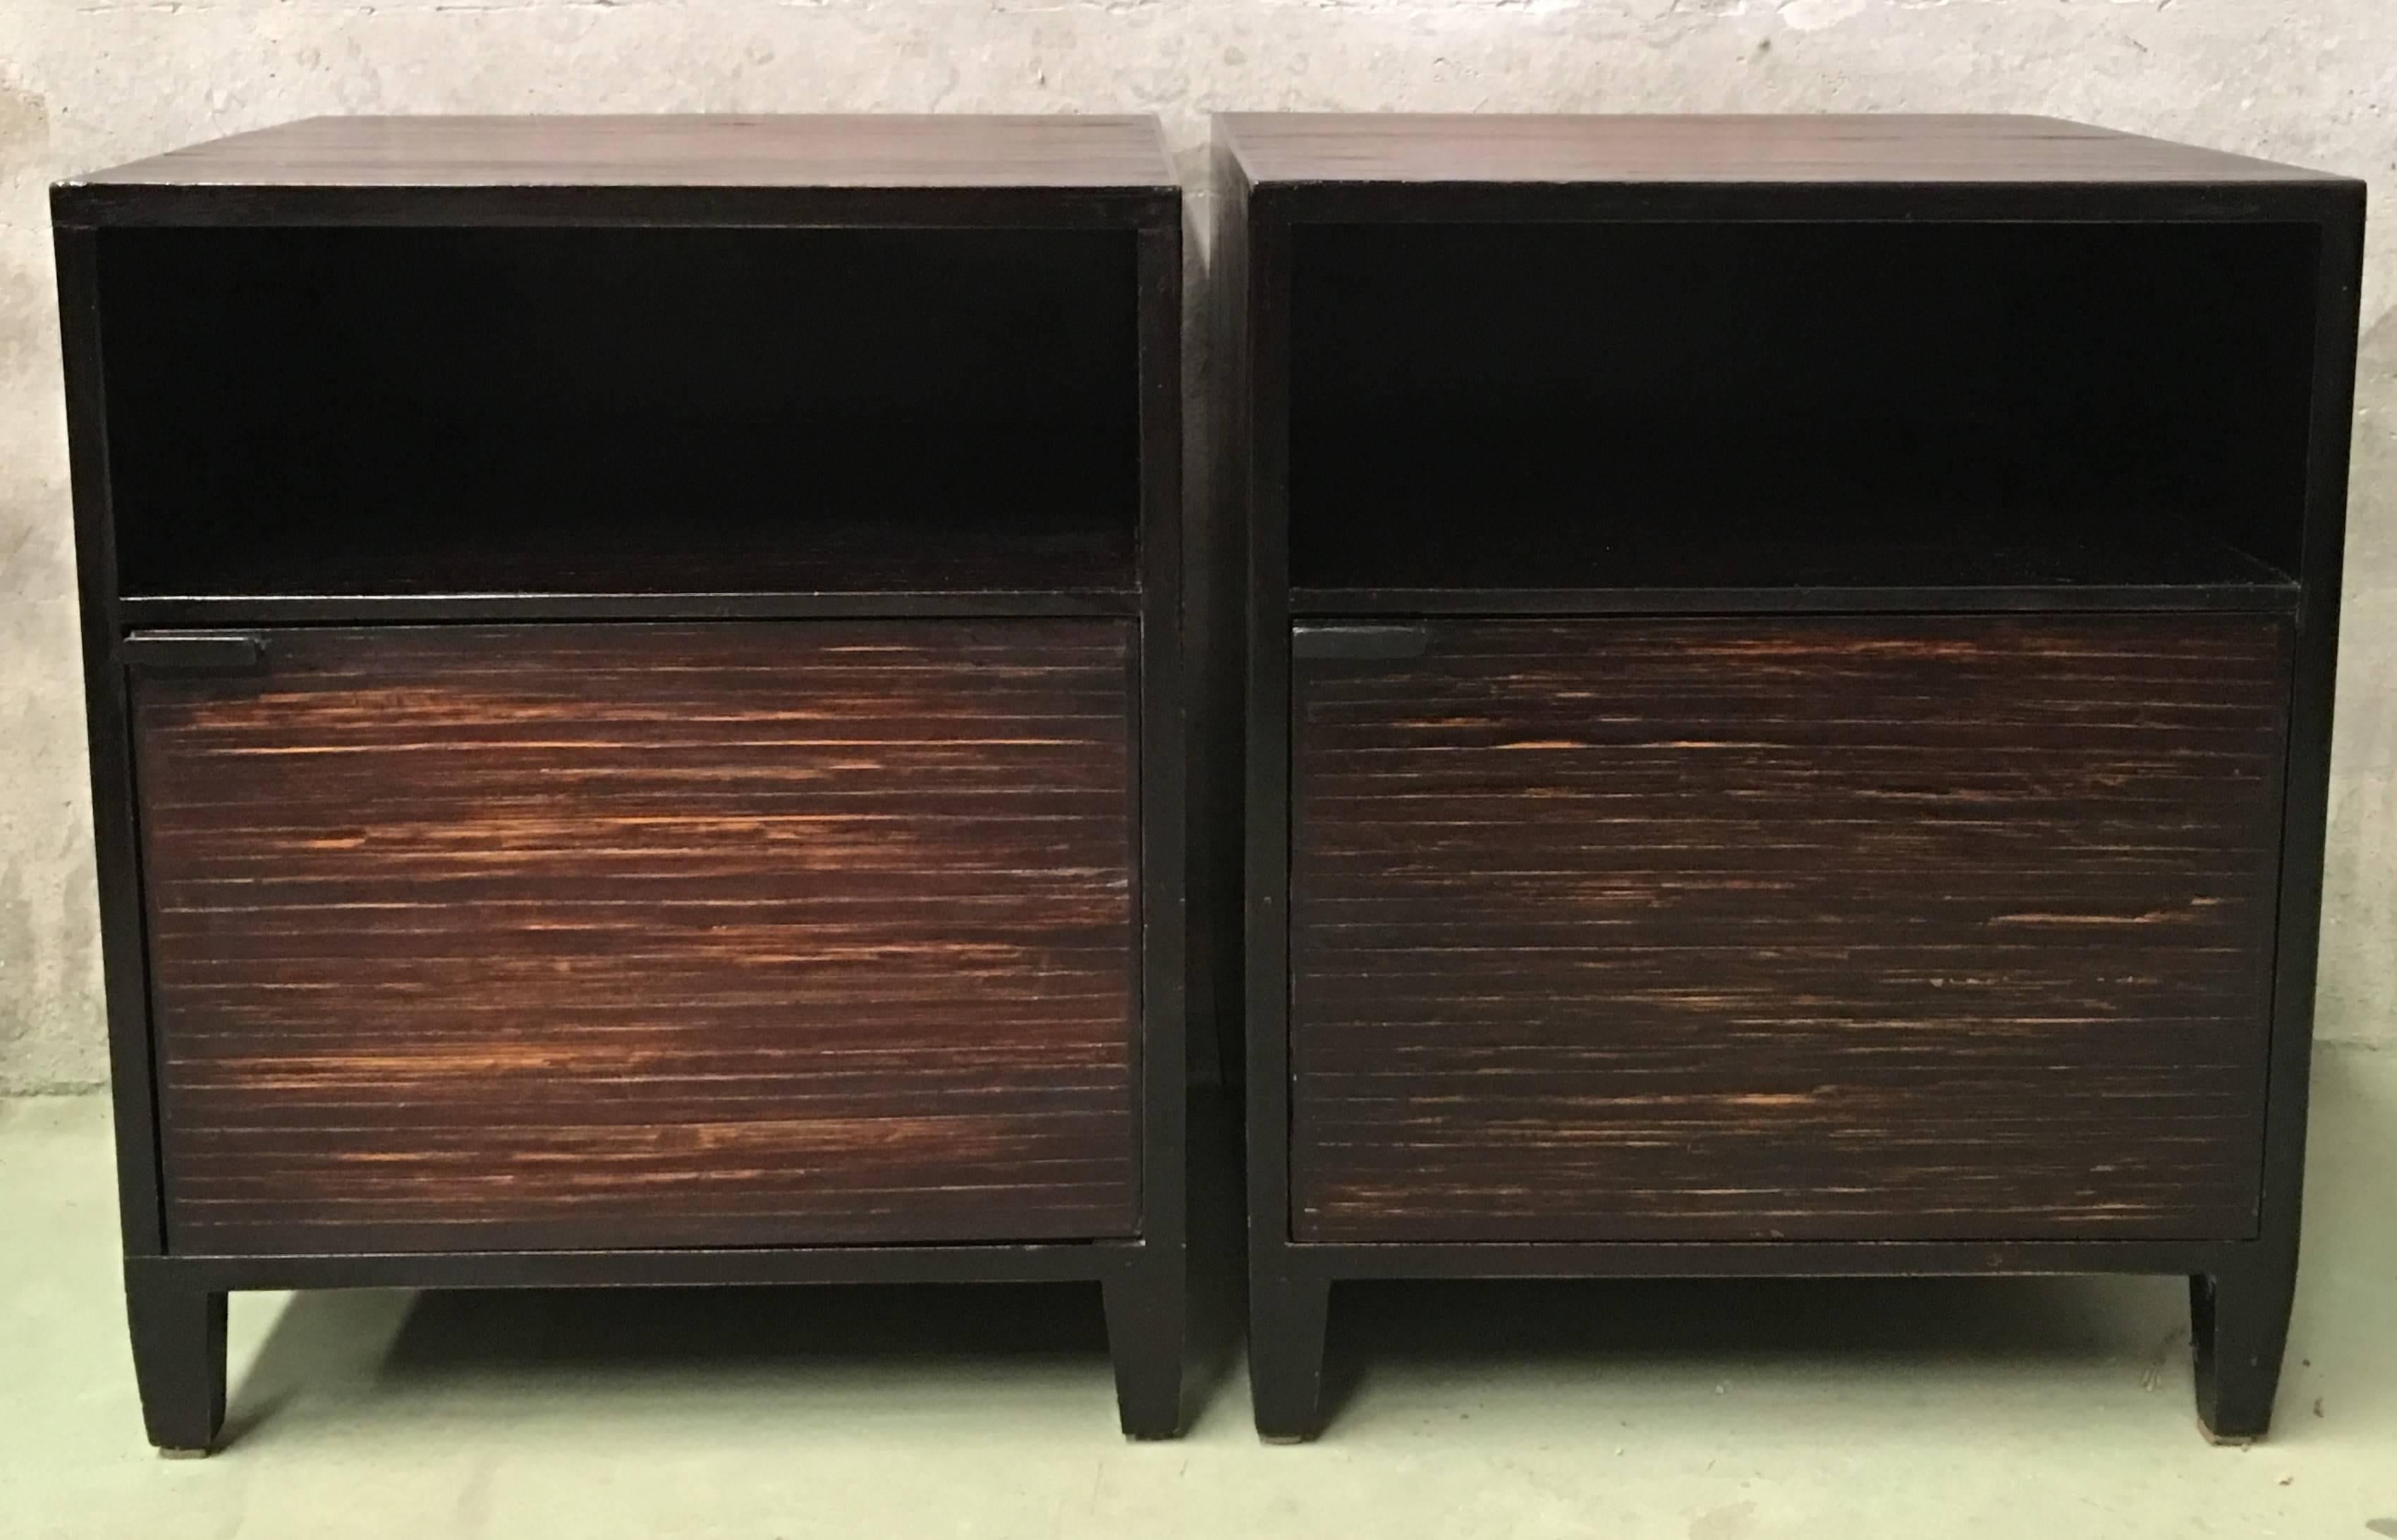 This very sophisticated nightstands or end tables feature a shadow box detailing framing the front. It features a cabinet with a shelf space above and also a cube with door. They are made of ebonized wood and have been restored to mint condition.